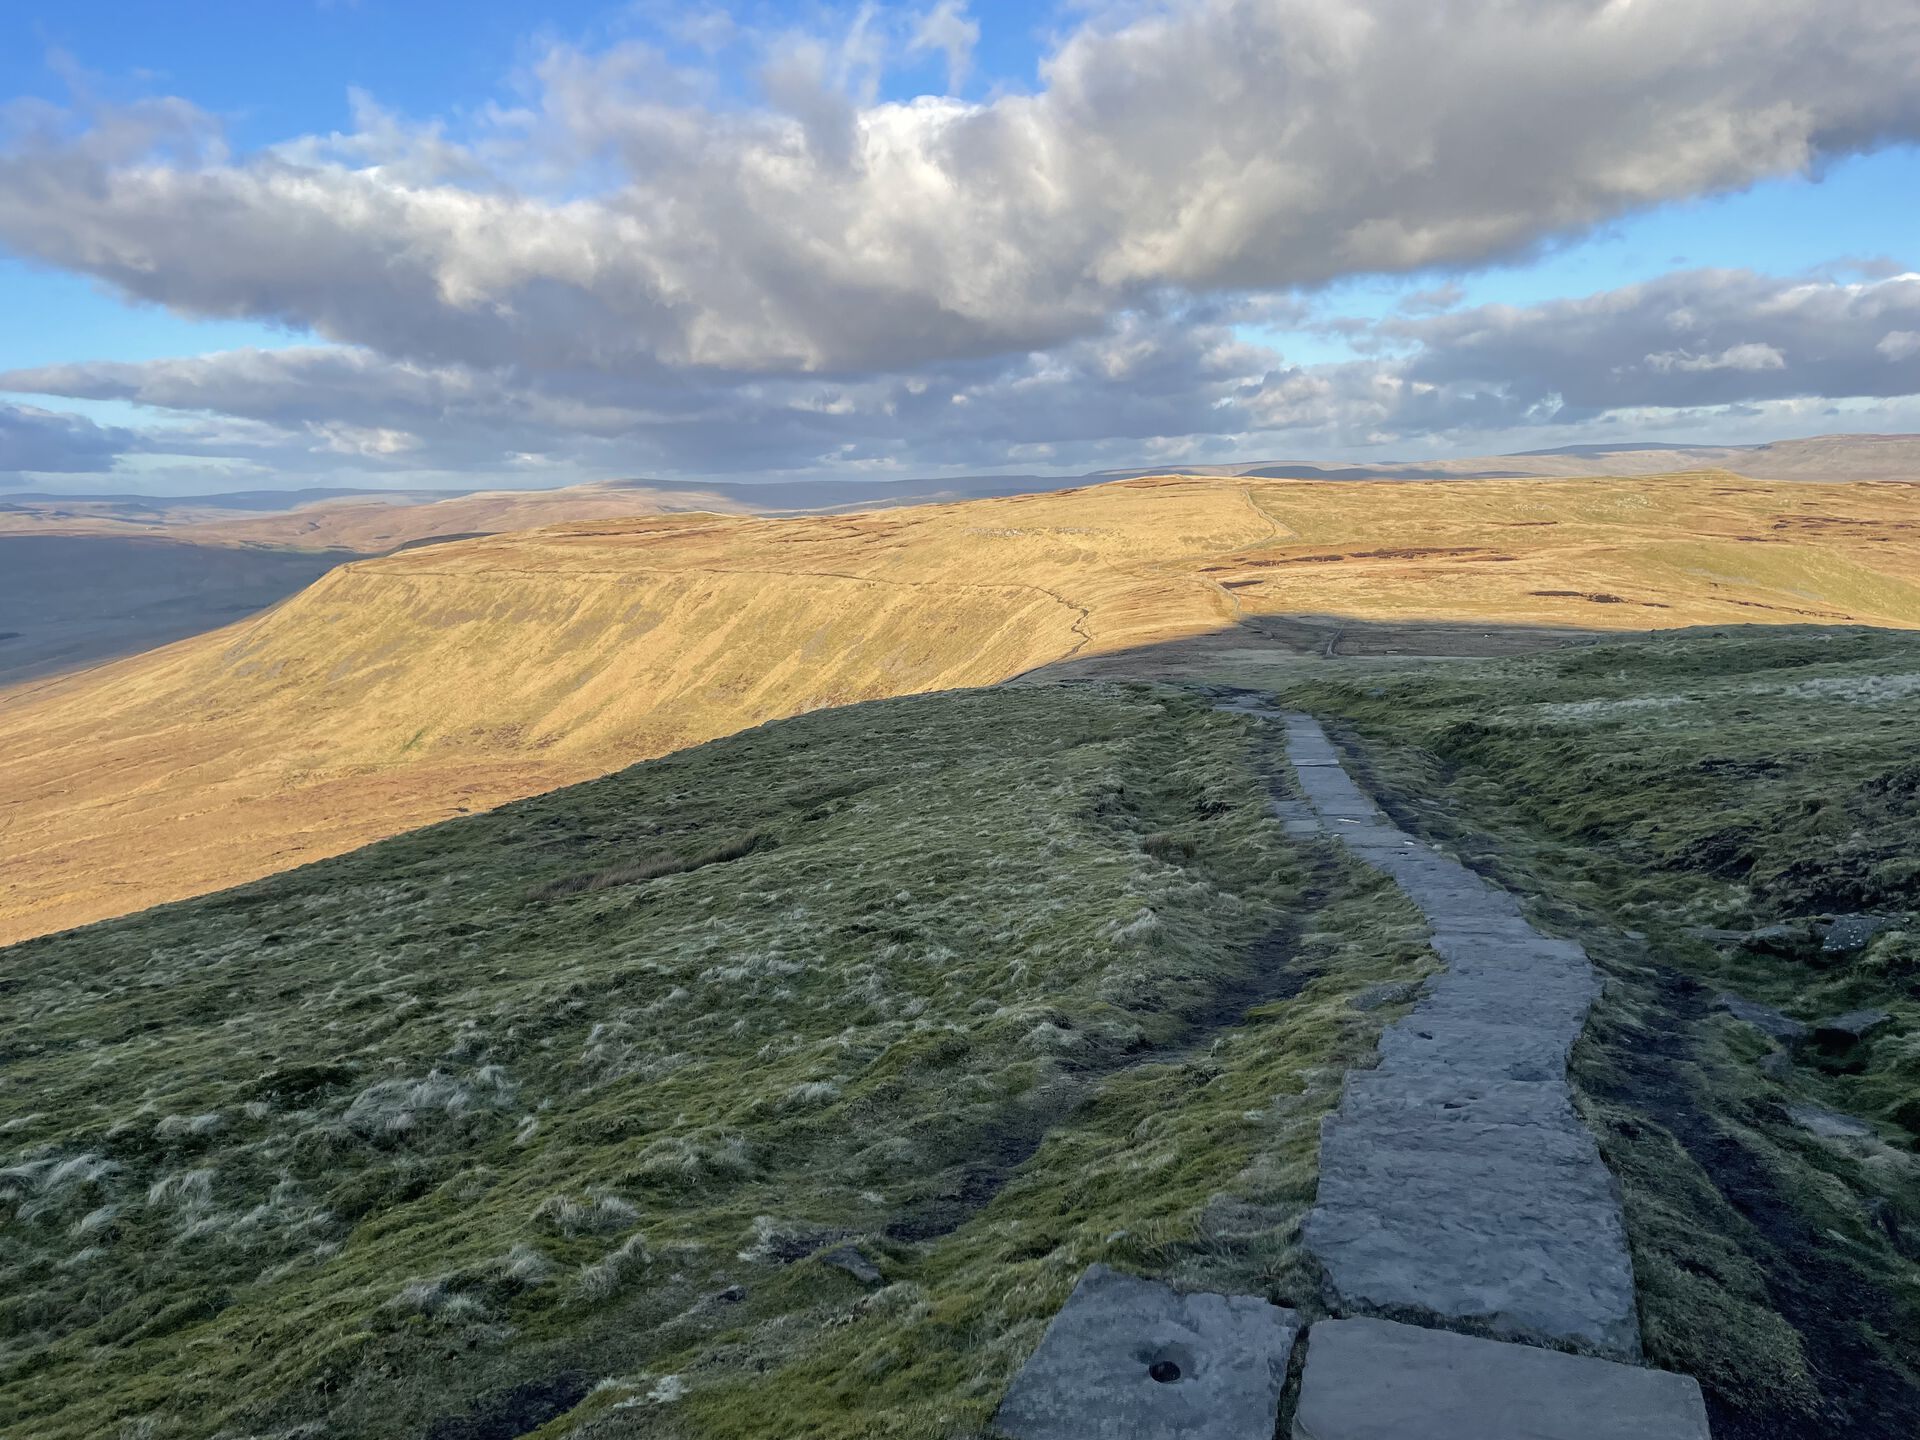 The descent from Ingleborough drops steeply off the escarpment on the left